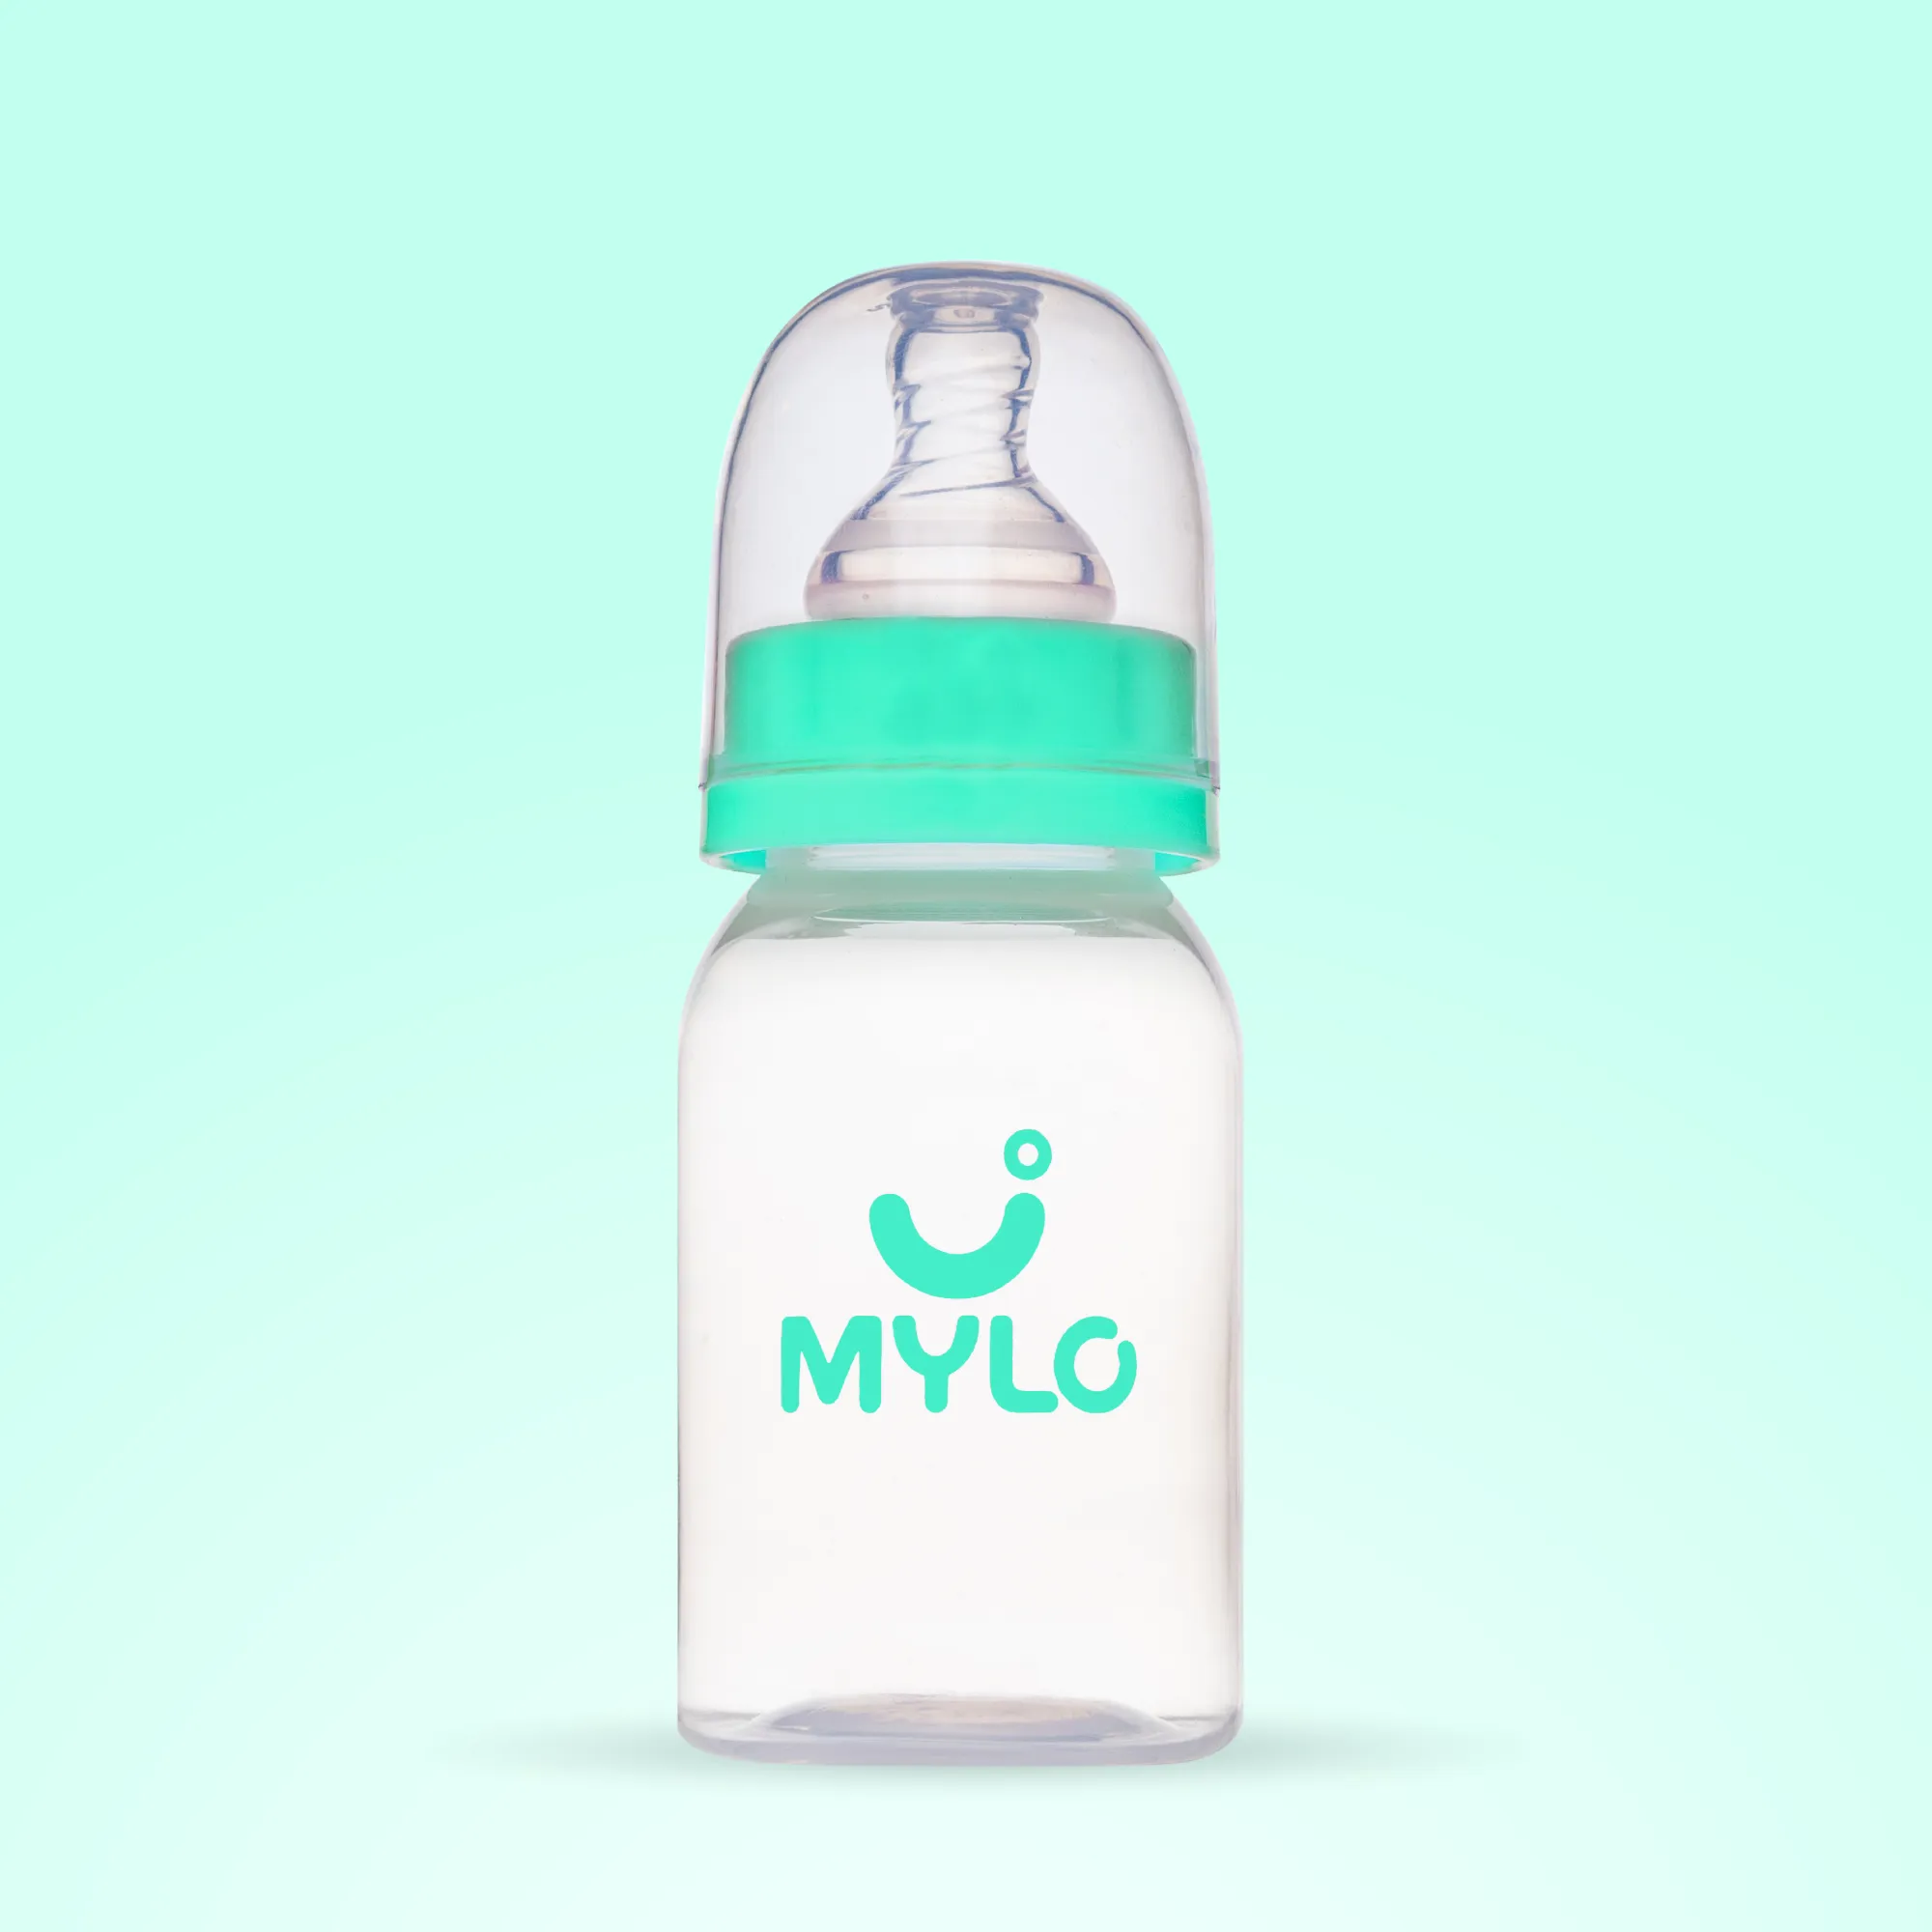 2-in-1 Baby Feeding Bottle | BPA Free with Anti-Colic Nipple & Spoon | Feels Natural Baby Bottle | Easy Flow Neck Design - Green 125ml